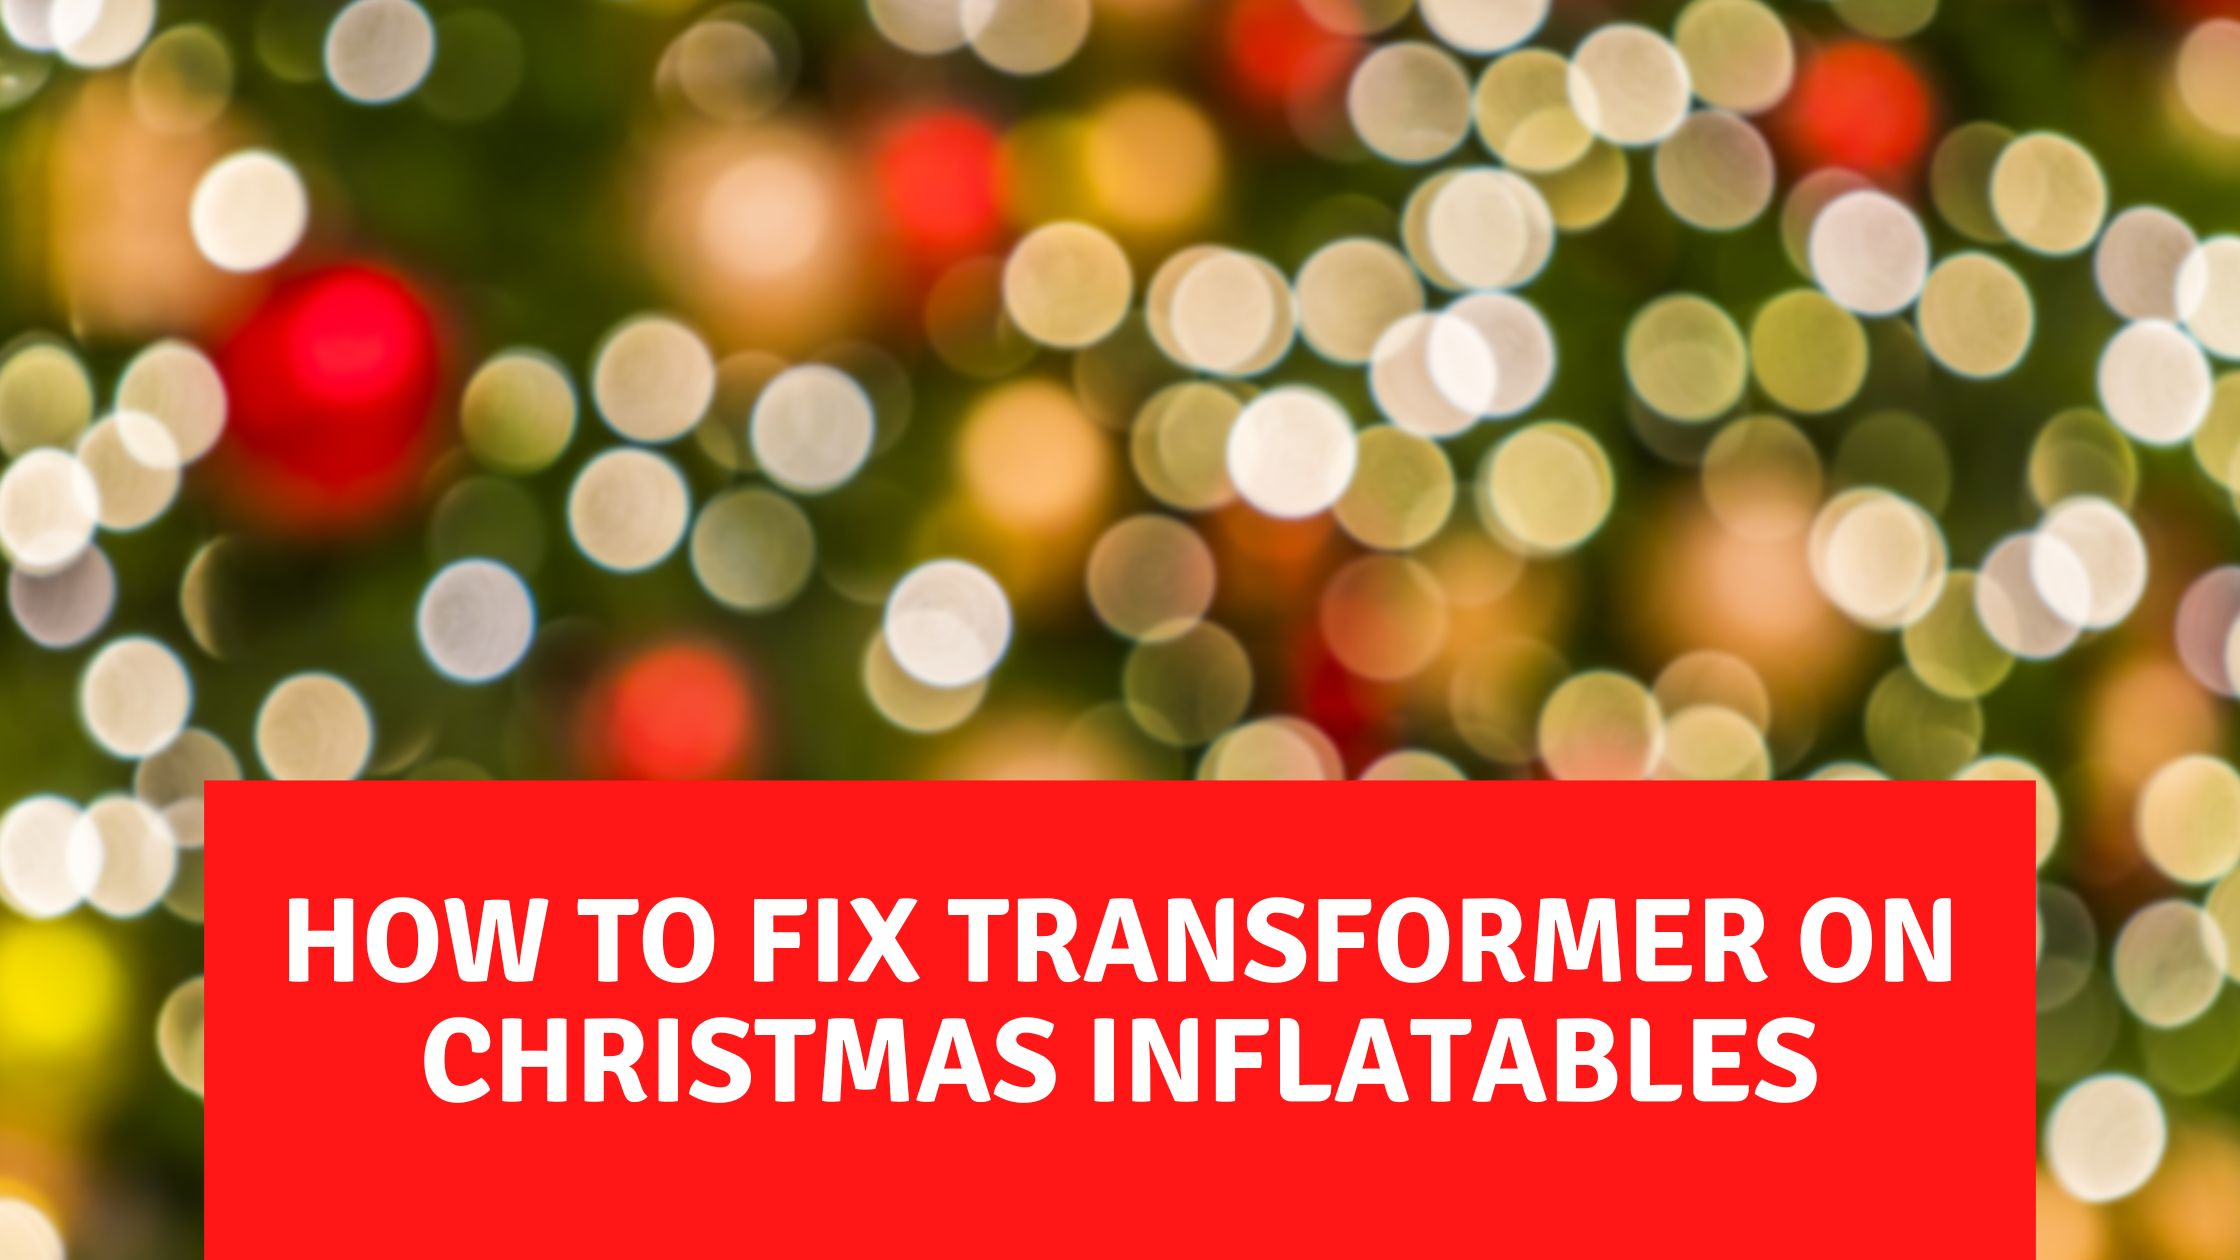 How to fix transformer on Christmas inflatables